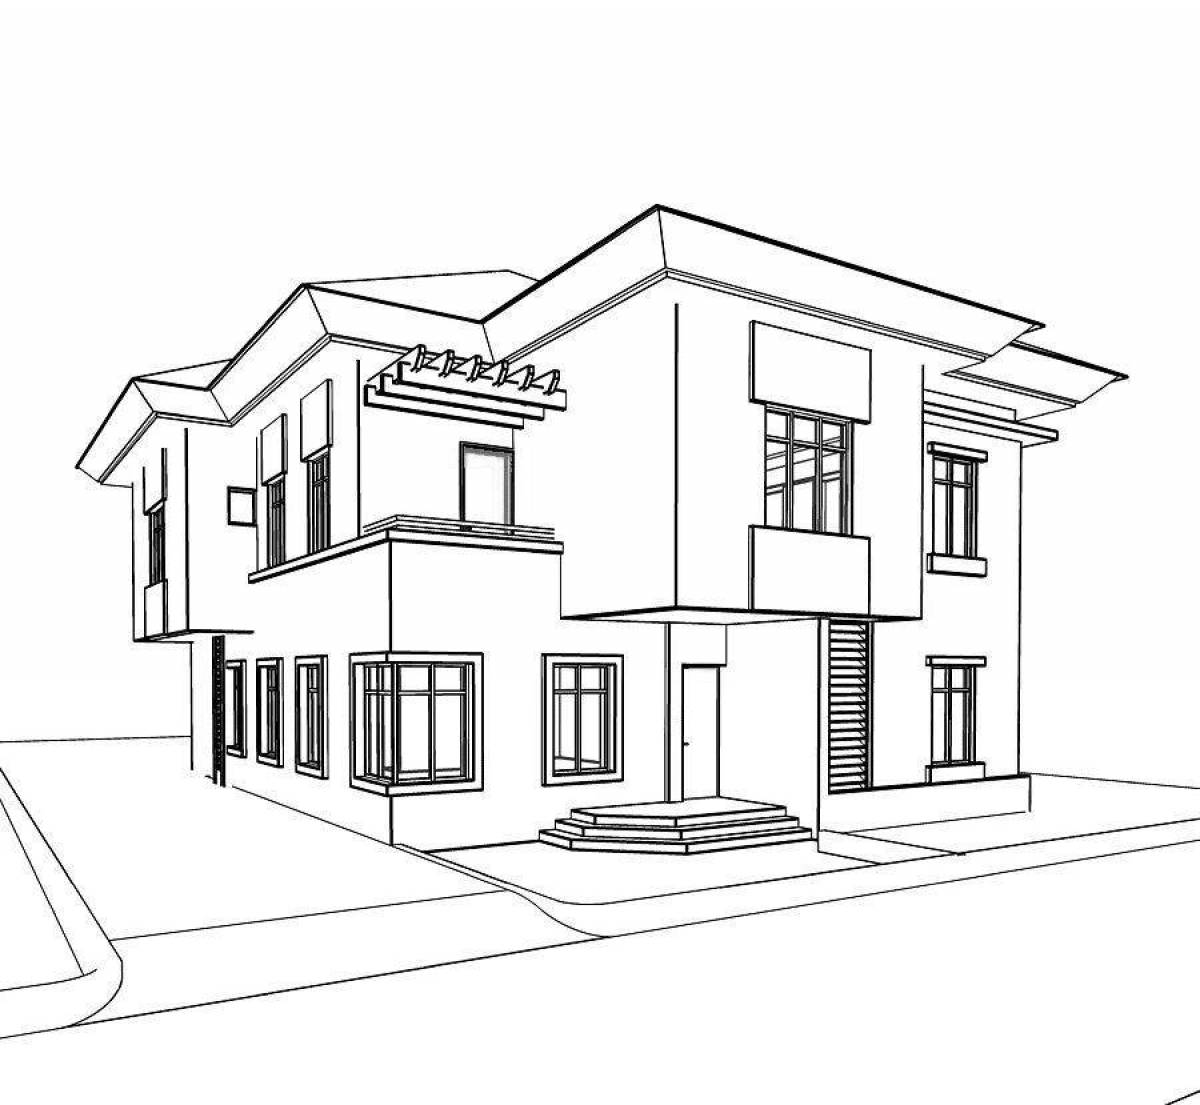 Colouring a colorful two-storey house